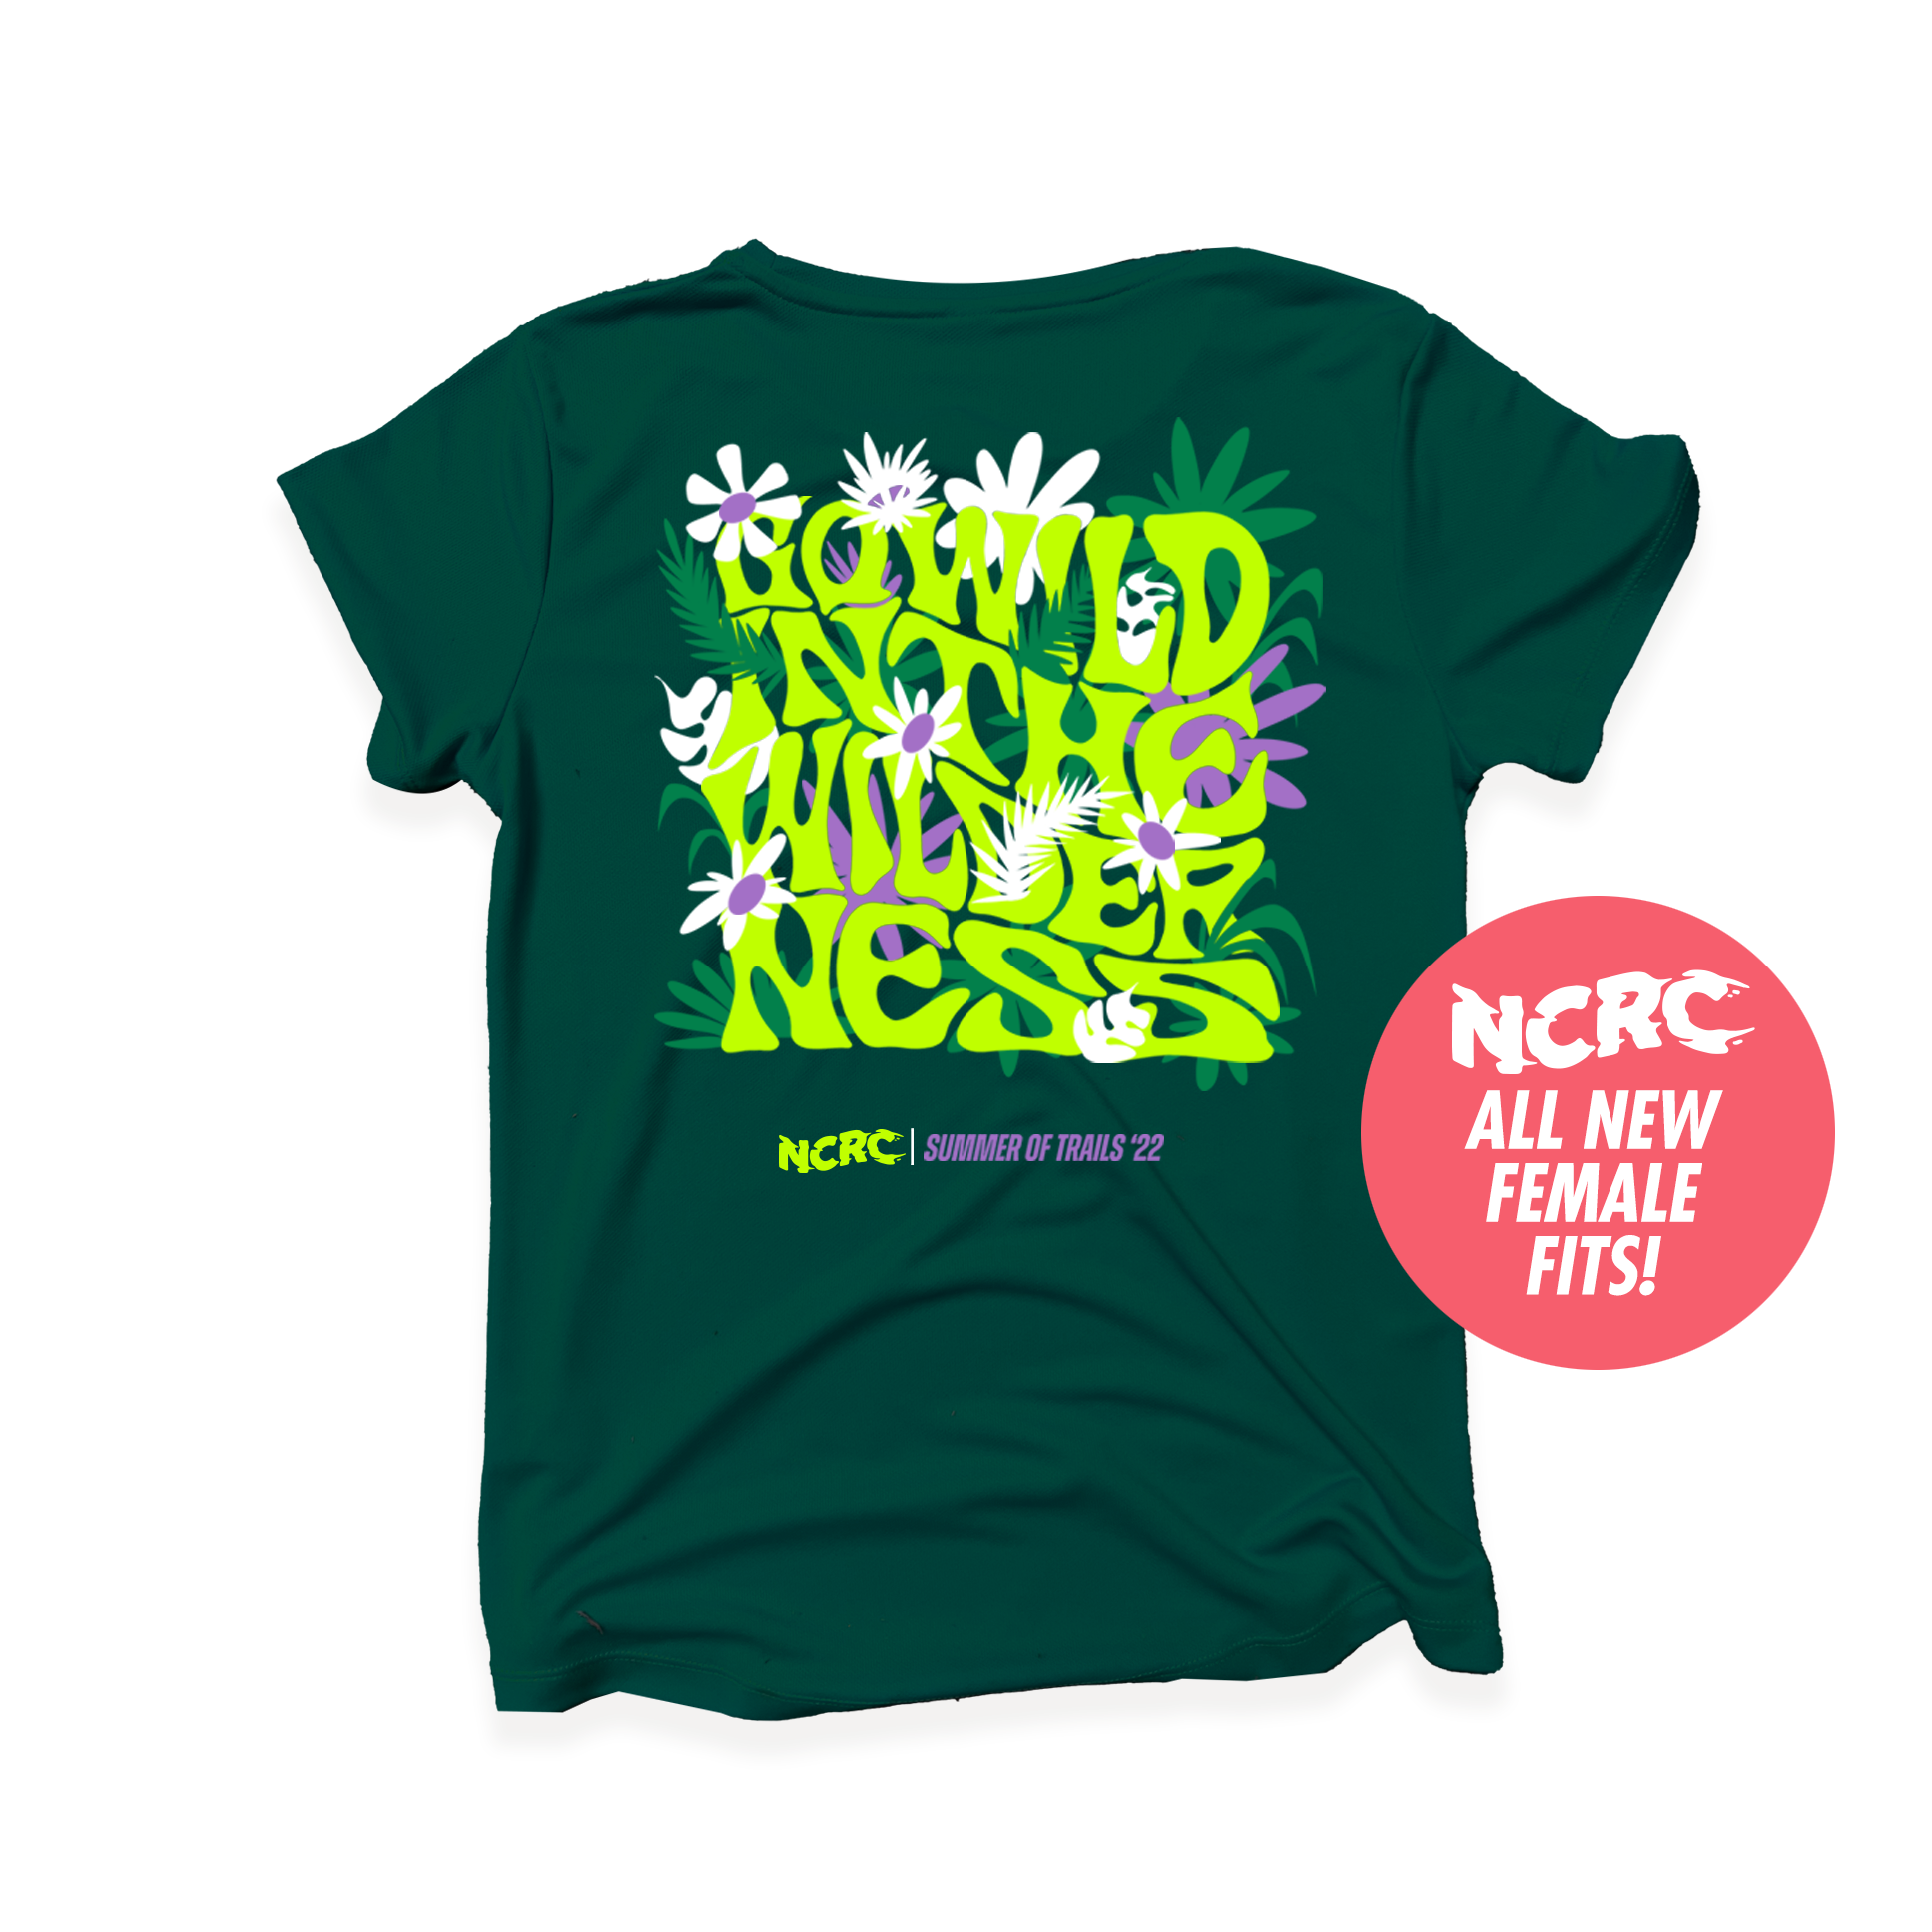 NCRC Female Fits: Go Wild In The Wilderness - Summer Of Trails '22